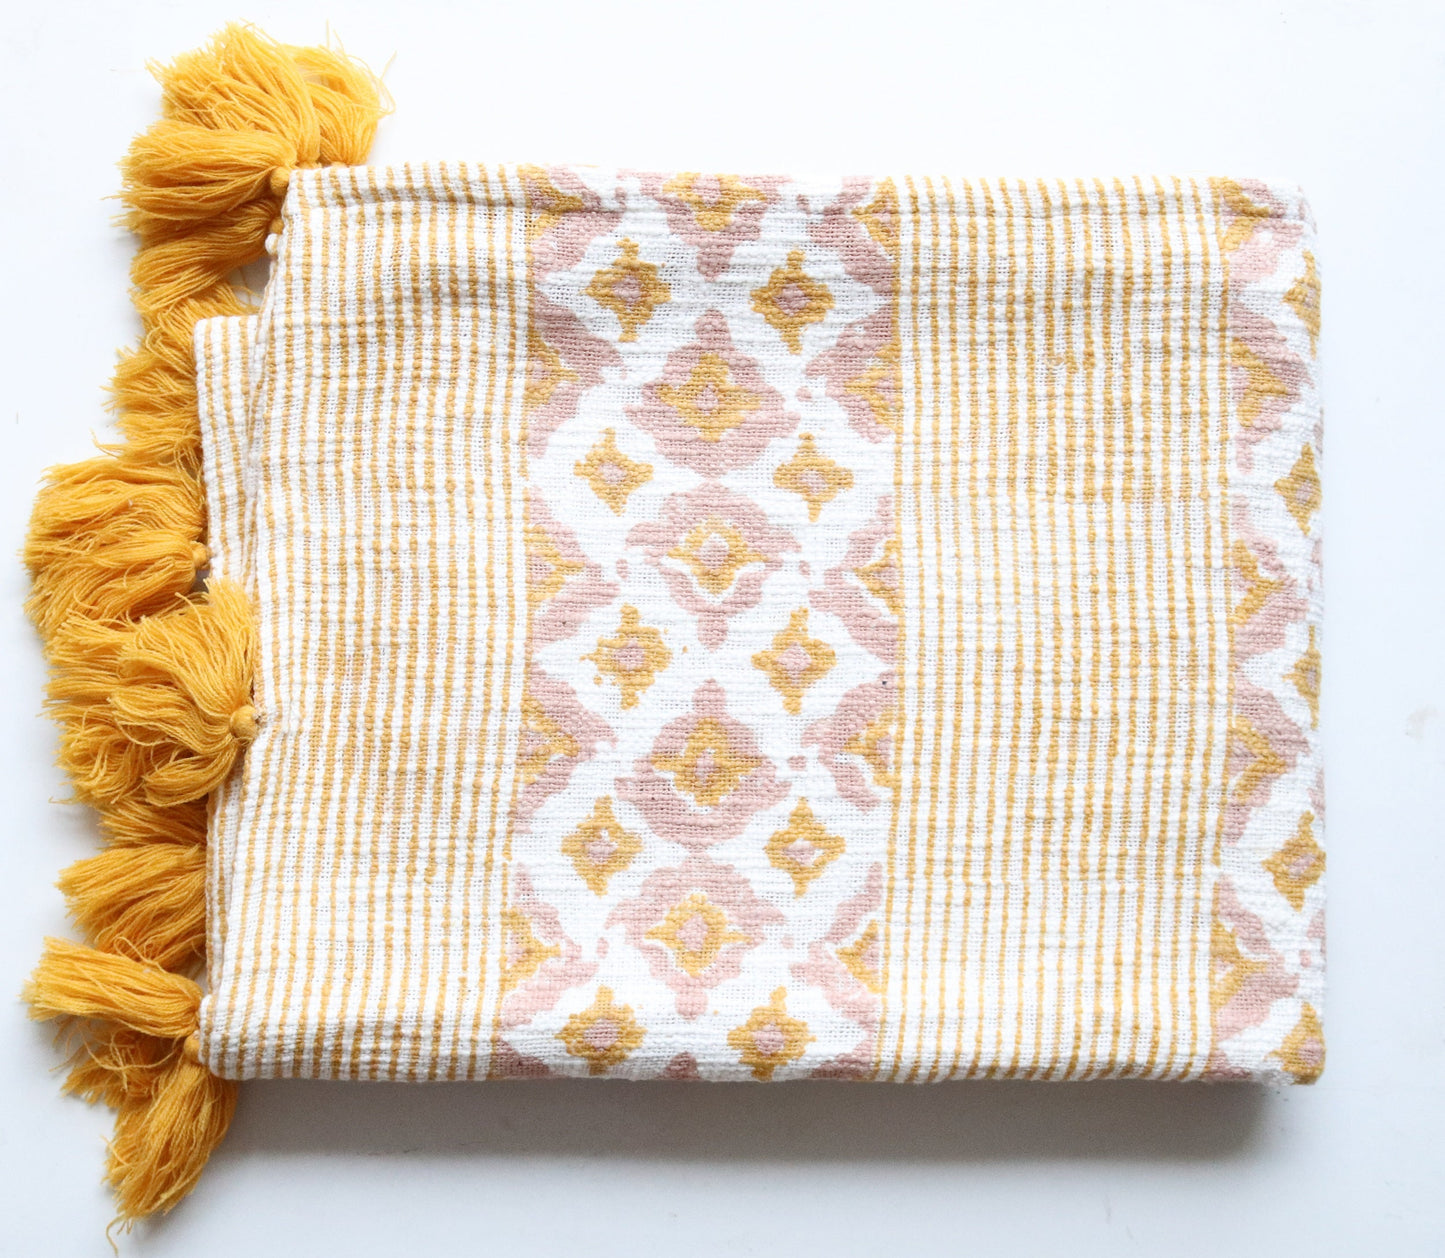 Printed cotton throw blanket - Mustard and pink Handloom Cotton throws - sofa throw with tassels - 55x70 inches